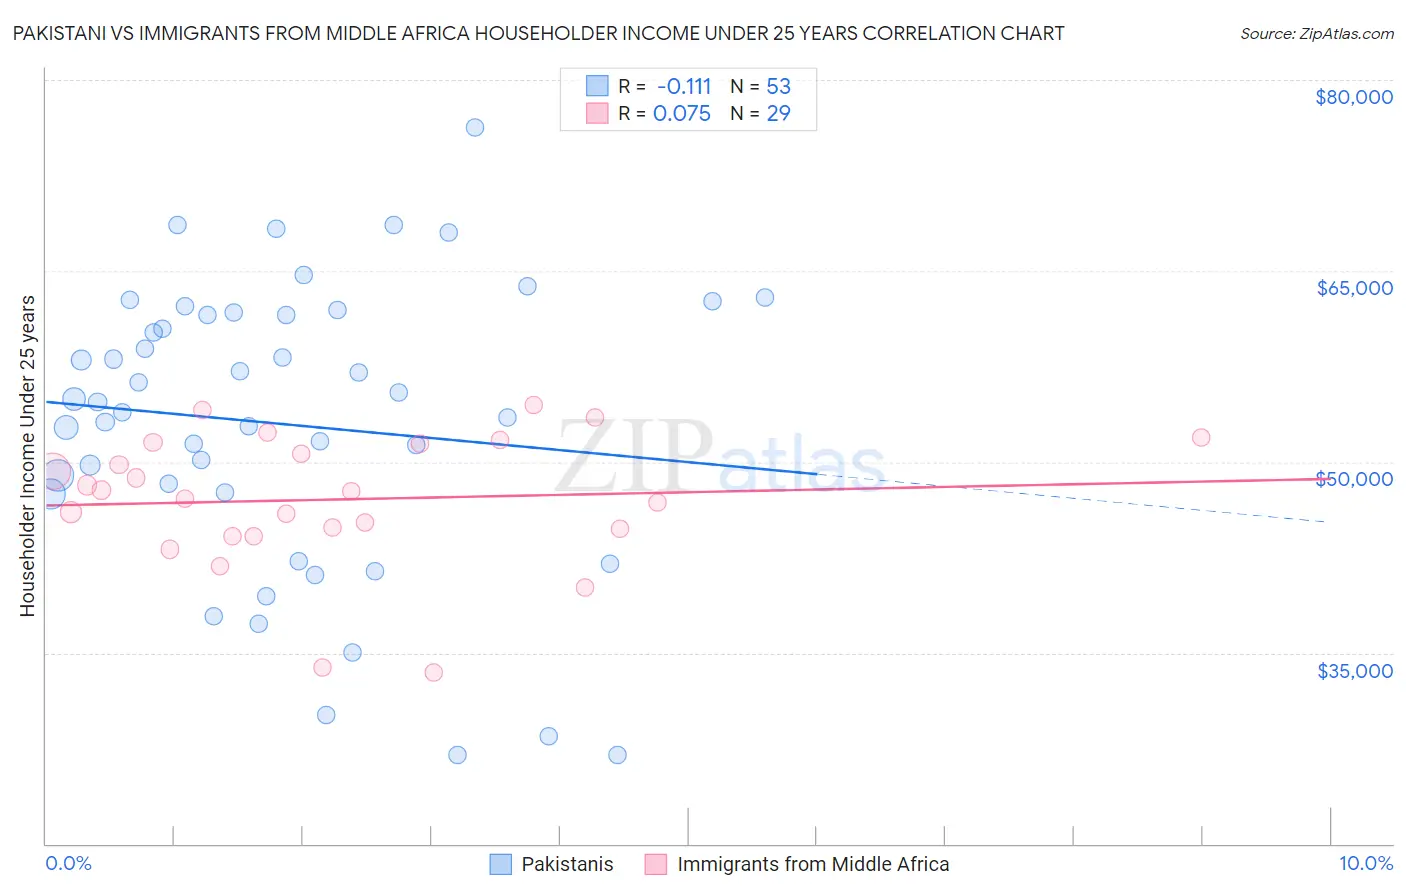 Pakistani vs Immigrants from Middle Africa Householder Income Under 25 years